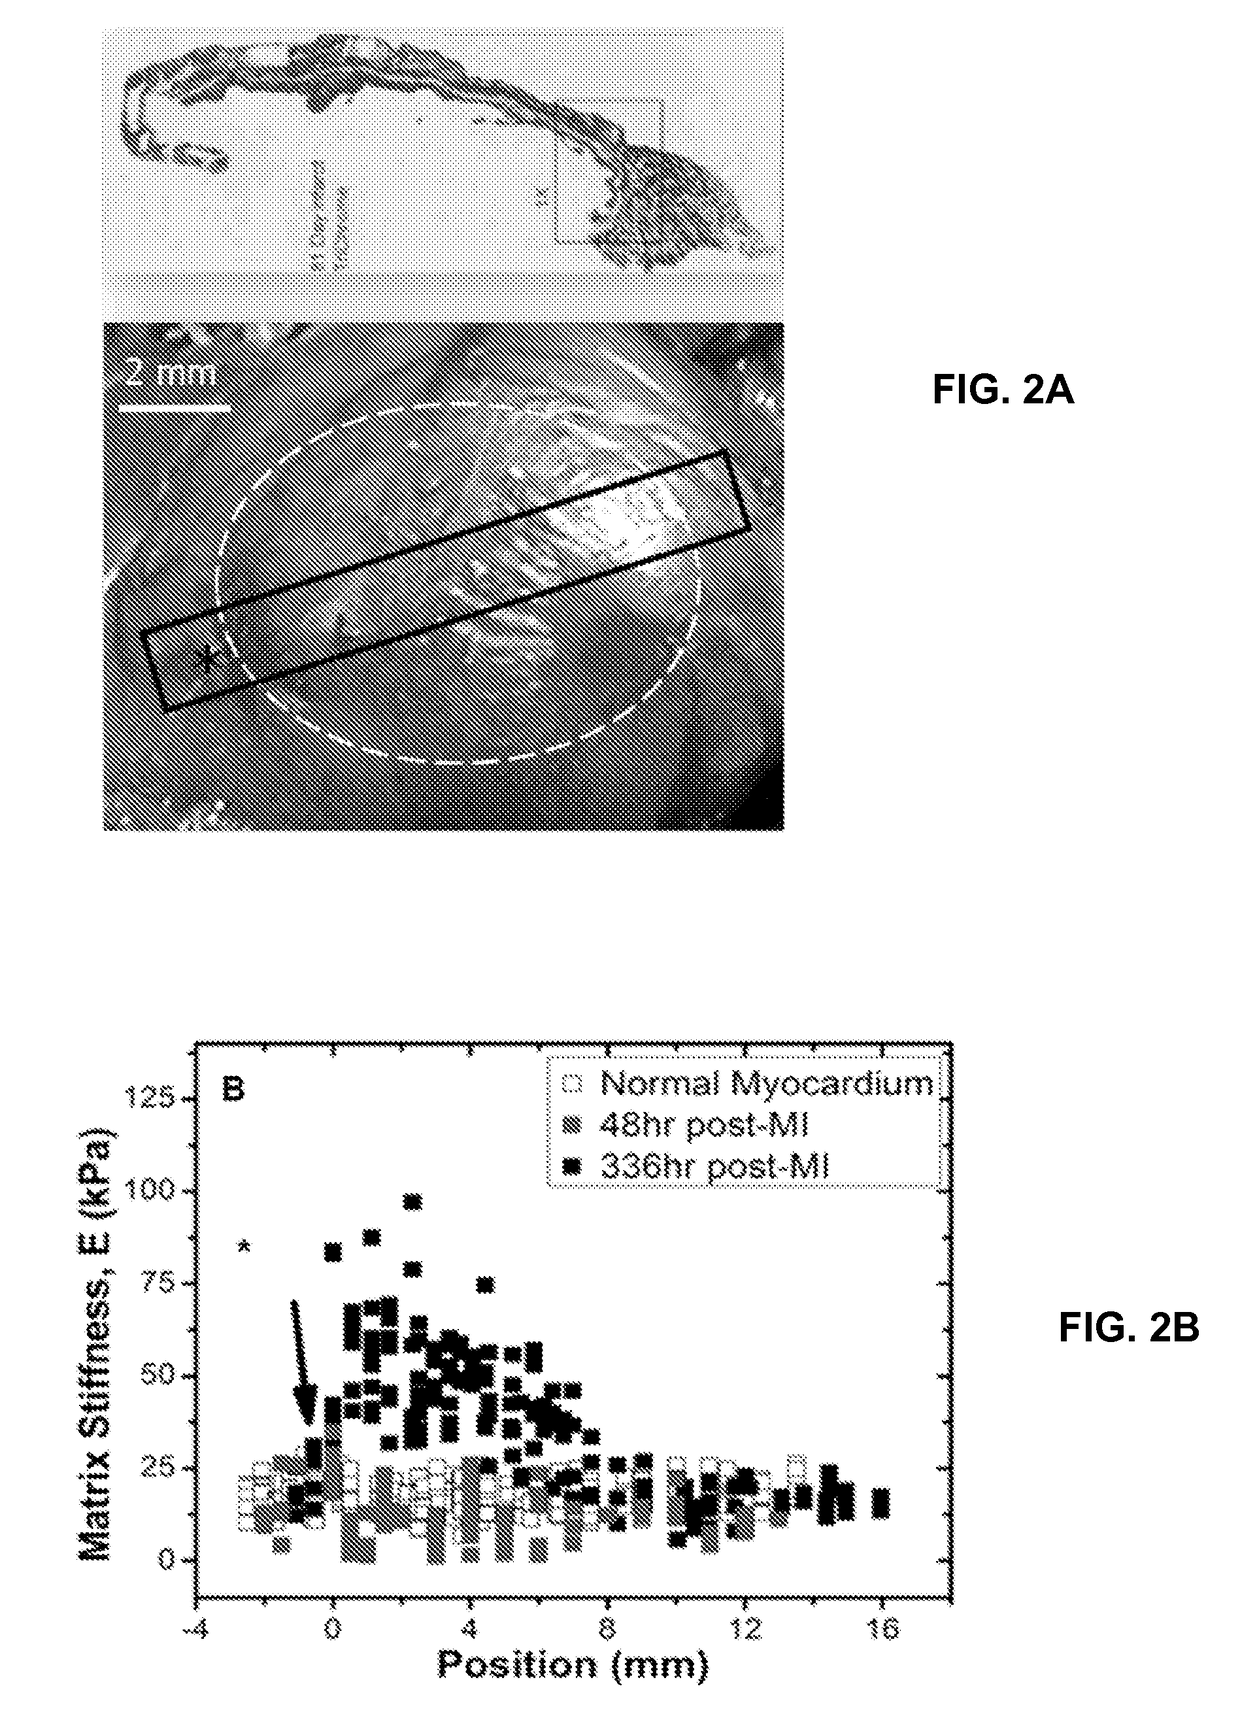 Systems and methods of disease modeling using static and time-dependent hydrogels